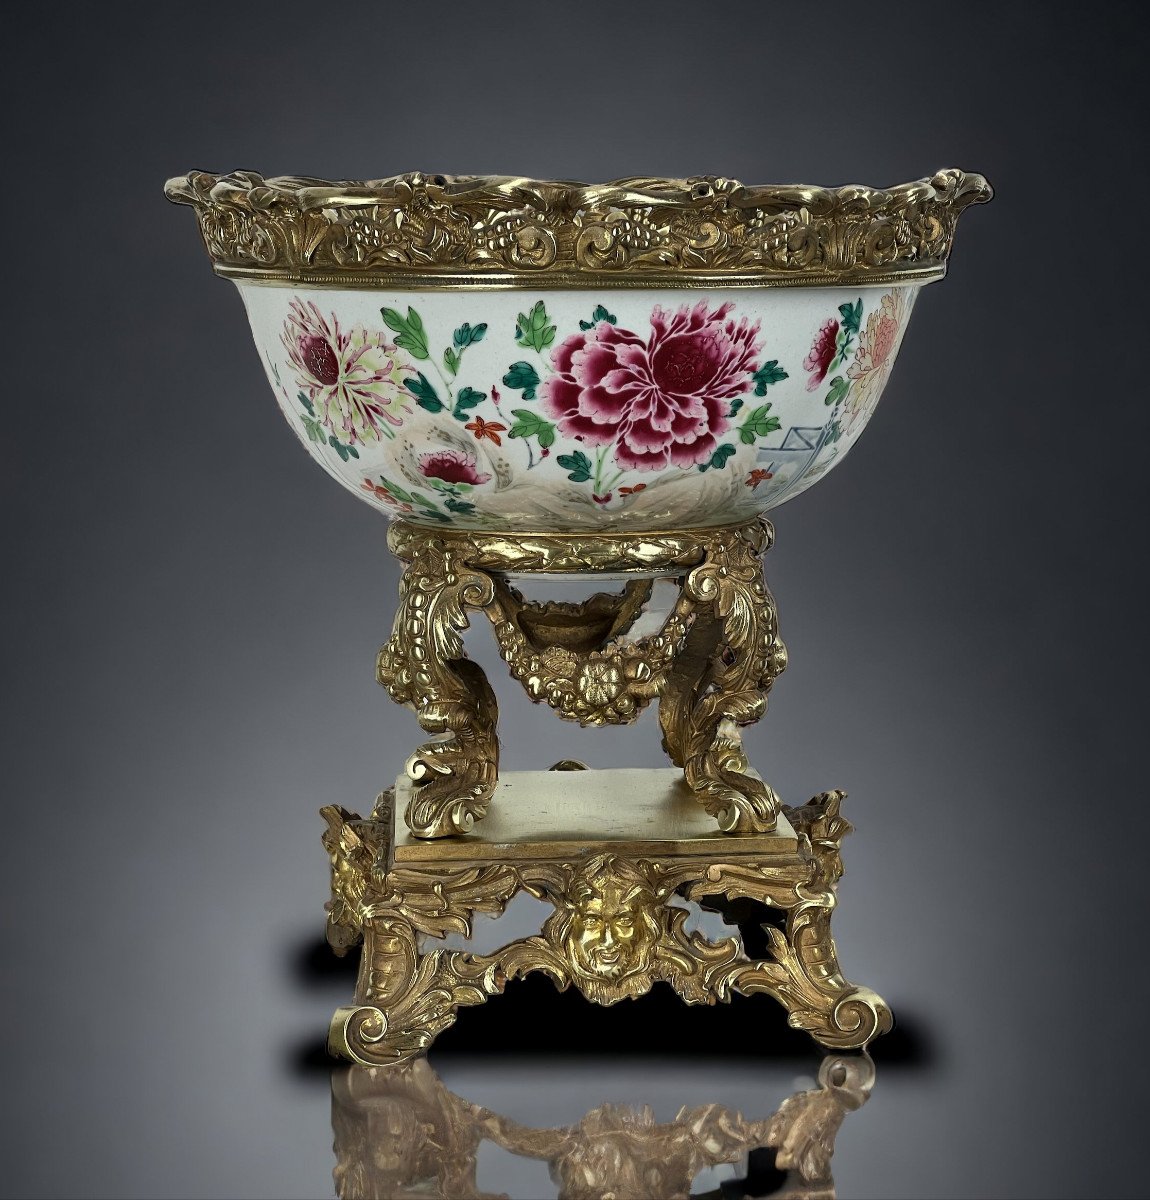 Large Chinese Cup From The 18th Century Decorated With Flowers Adorned With A Bronze Mount